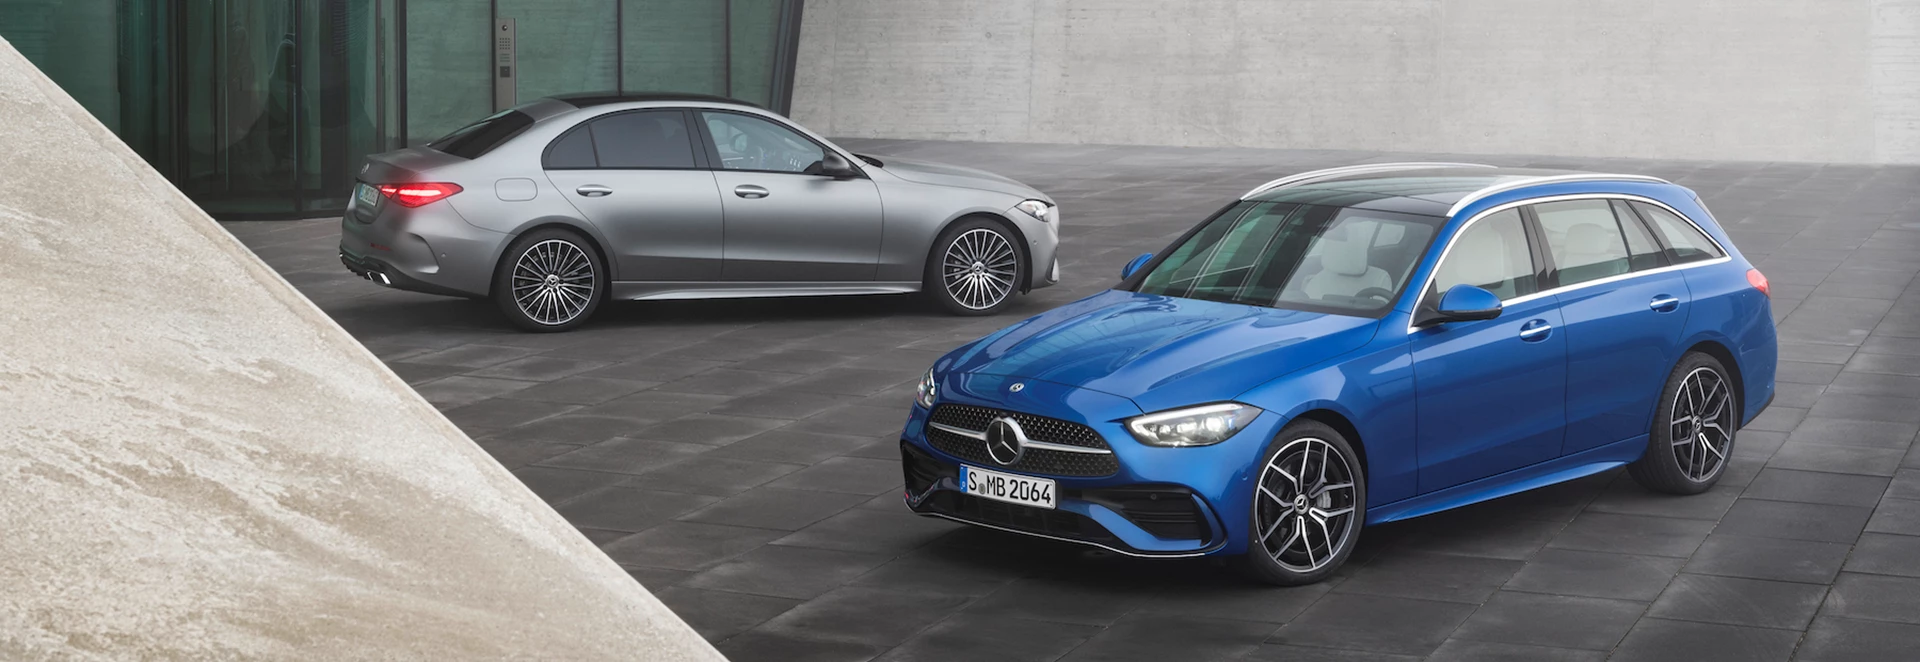 Next-generation Mercedes C-Class unveiled with more stylish look and radical new interior 